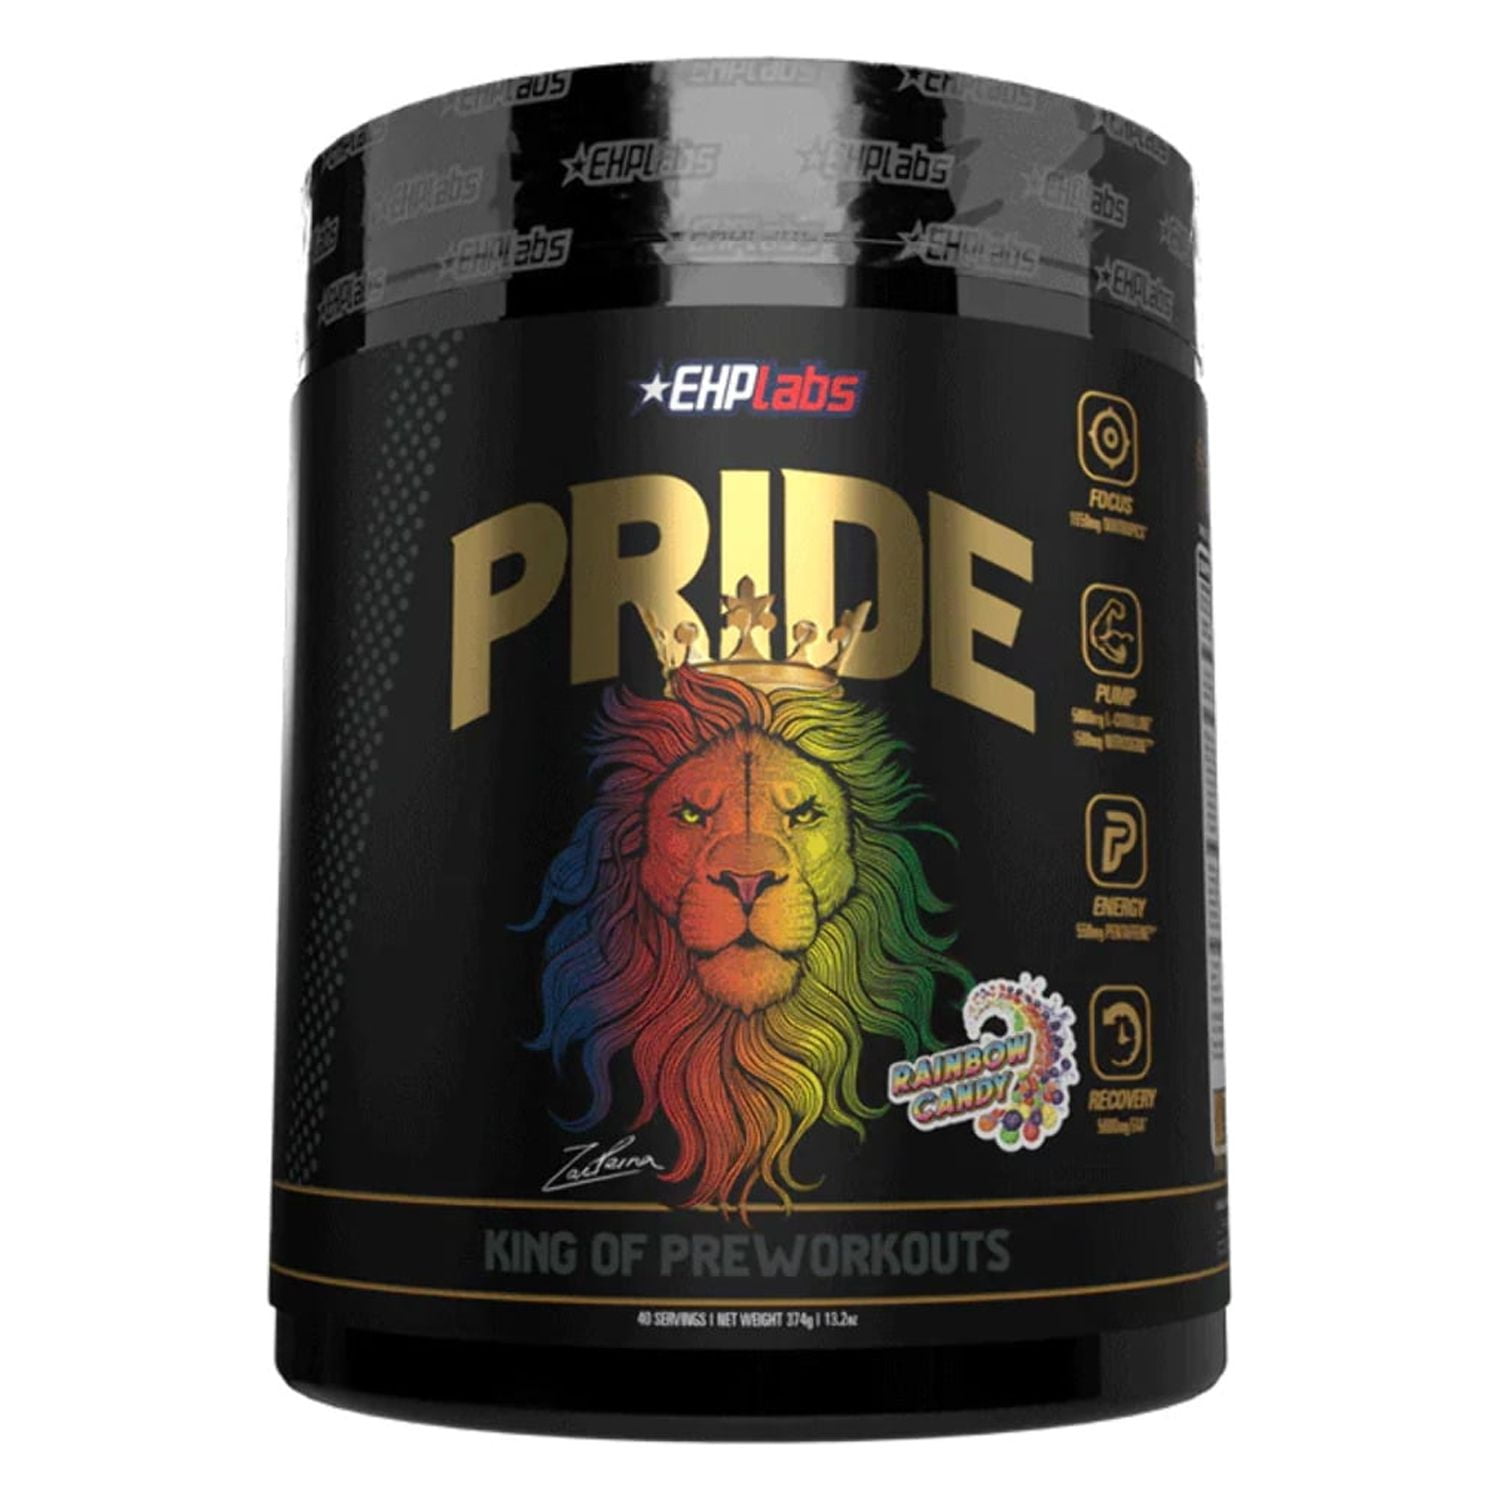 RNB Digital Protein Powder and Supplement Funnel Egypt